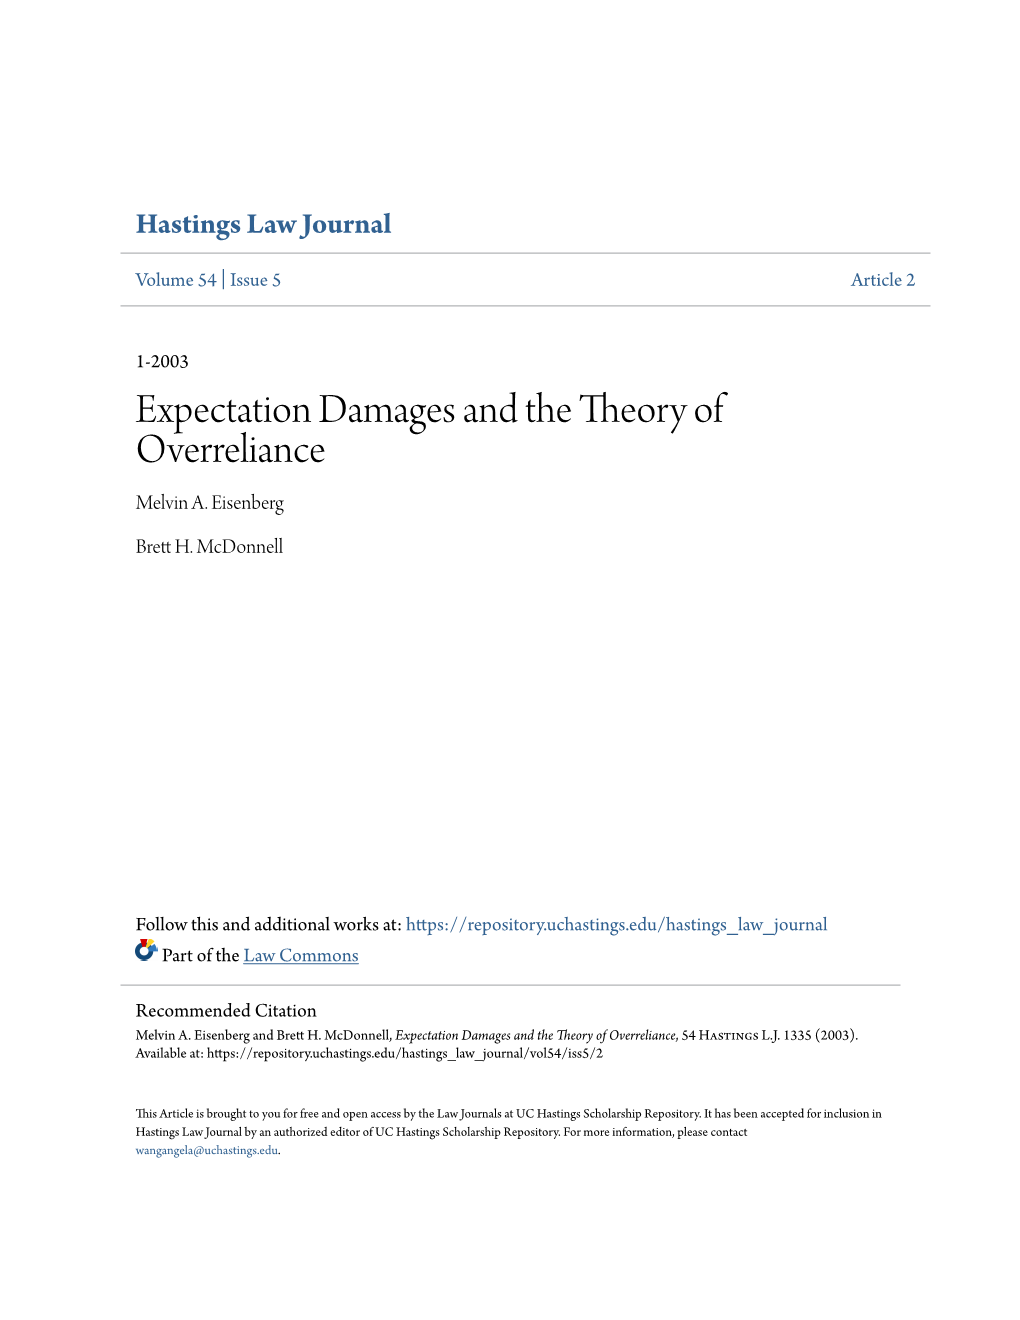 Expectation Damages and the Theory of Overreliance Melvin A